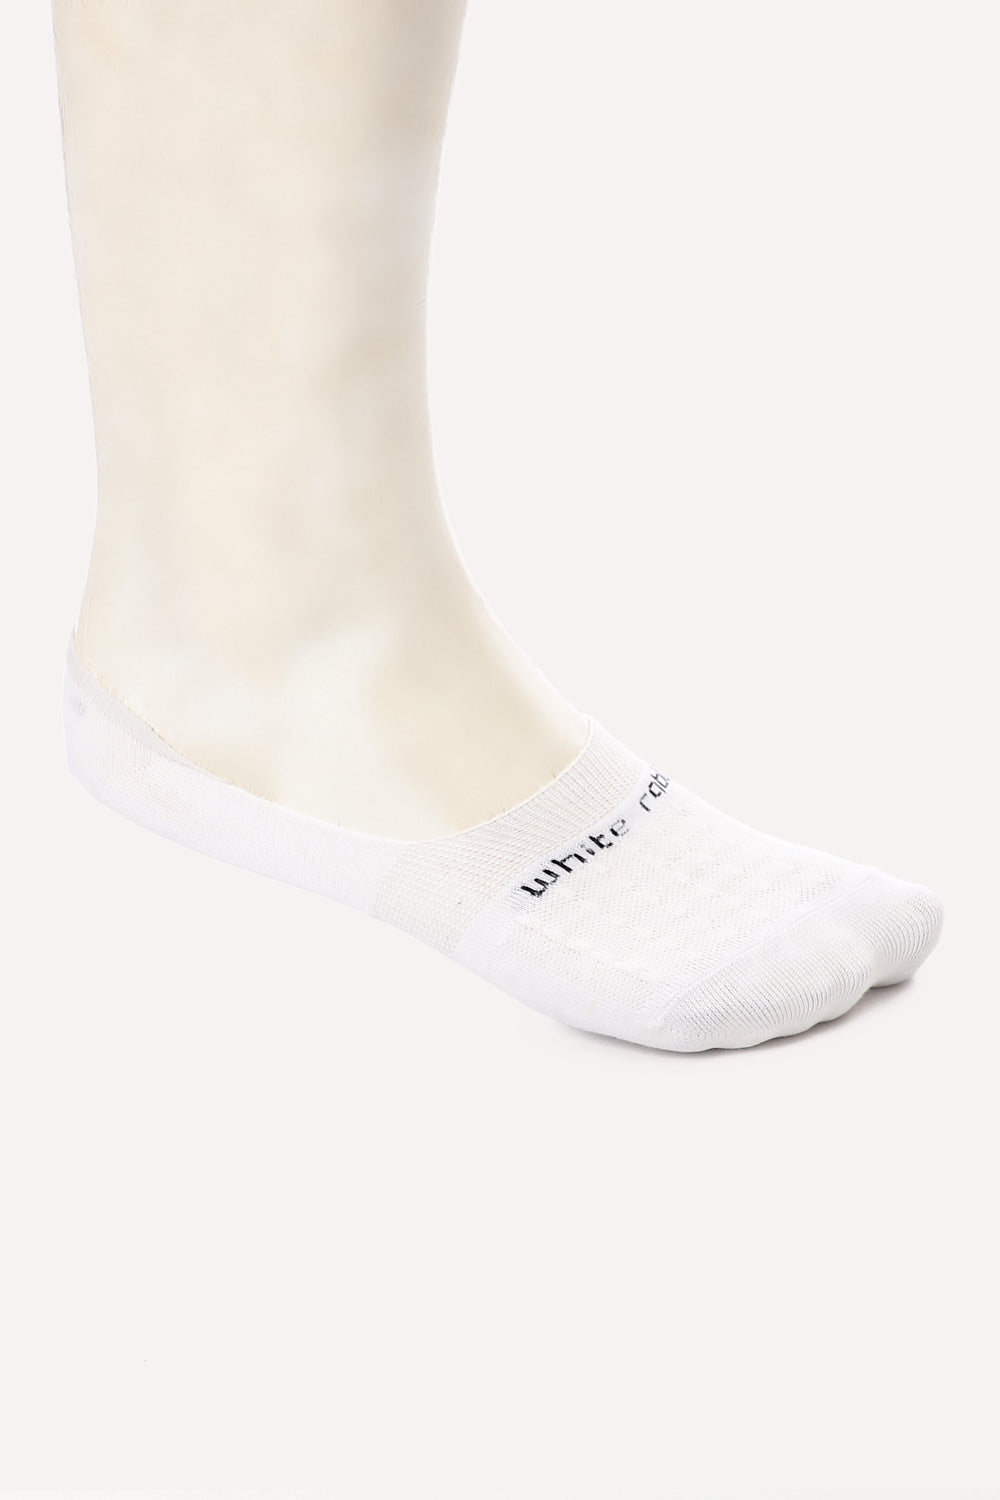 Casual Solid Cotton Invisible Socks